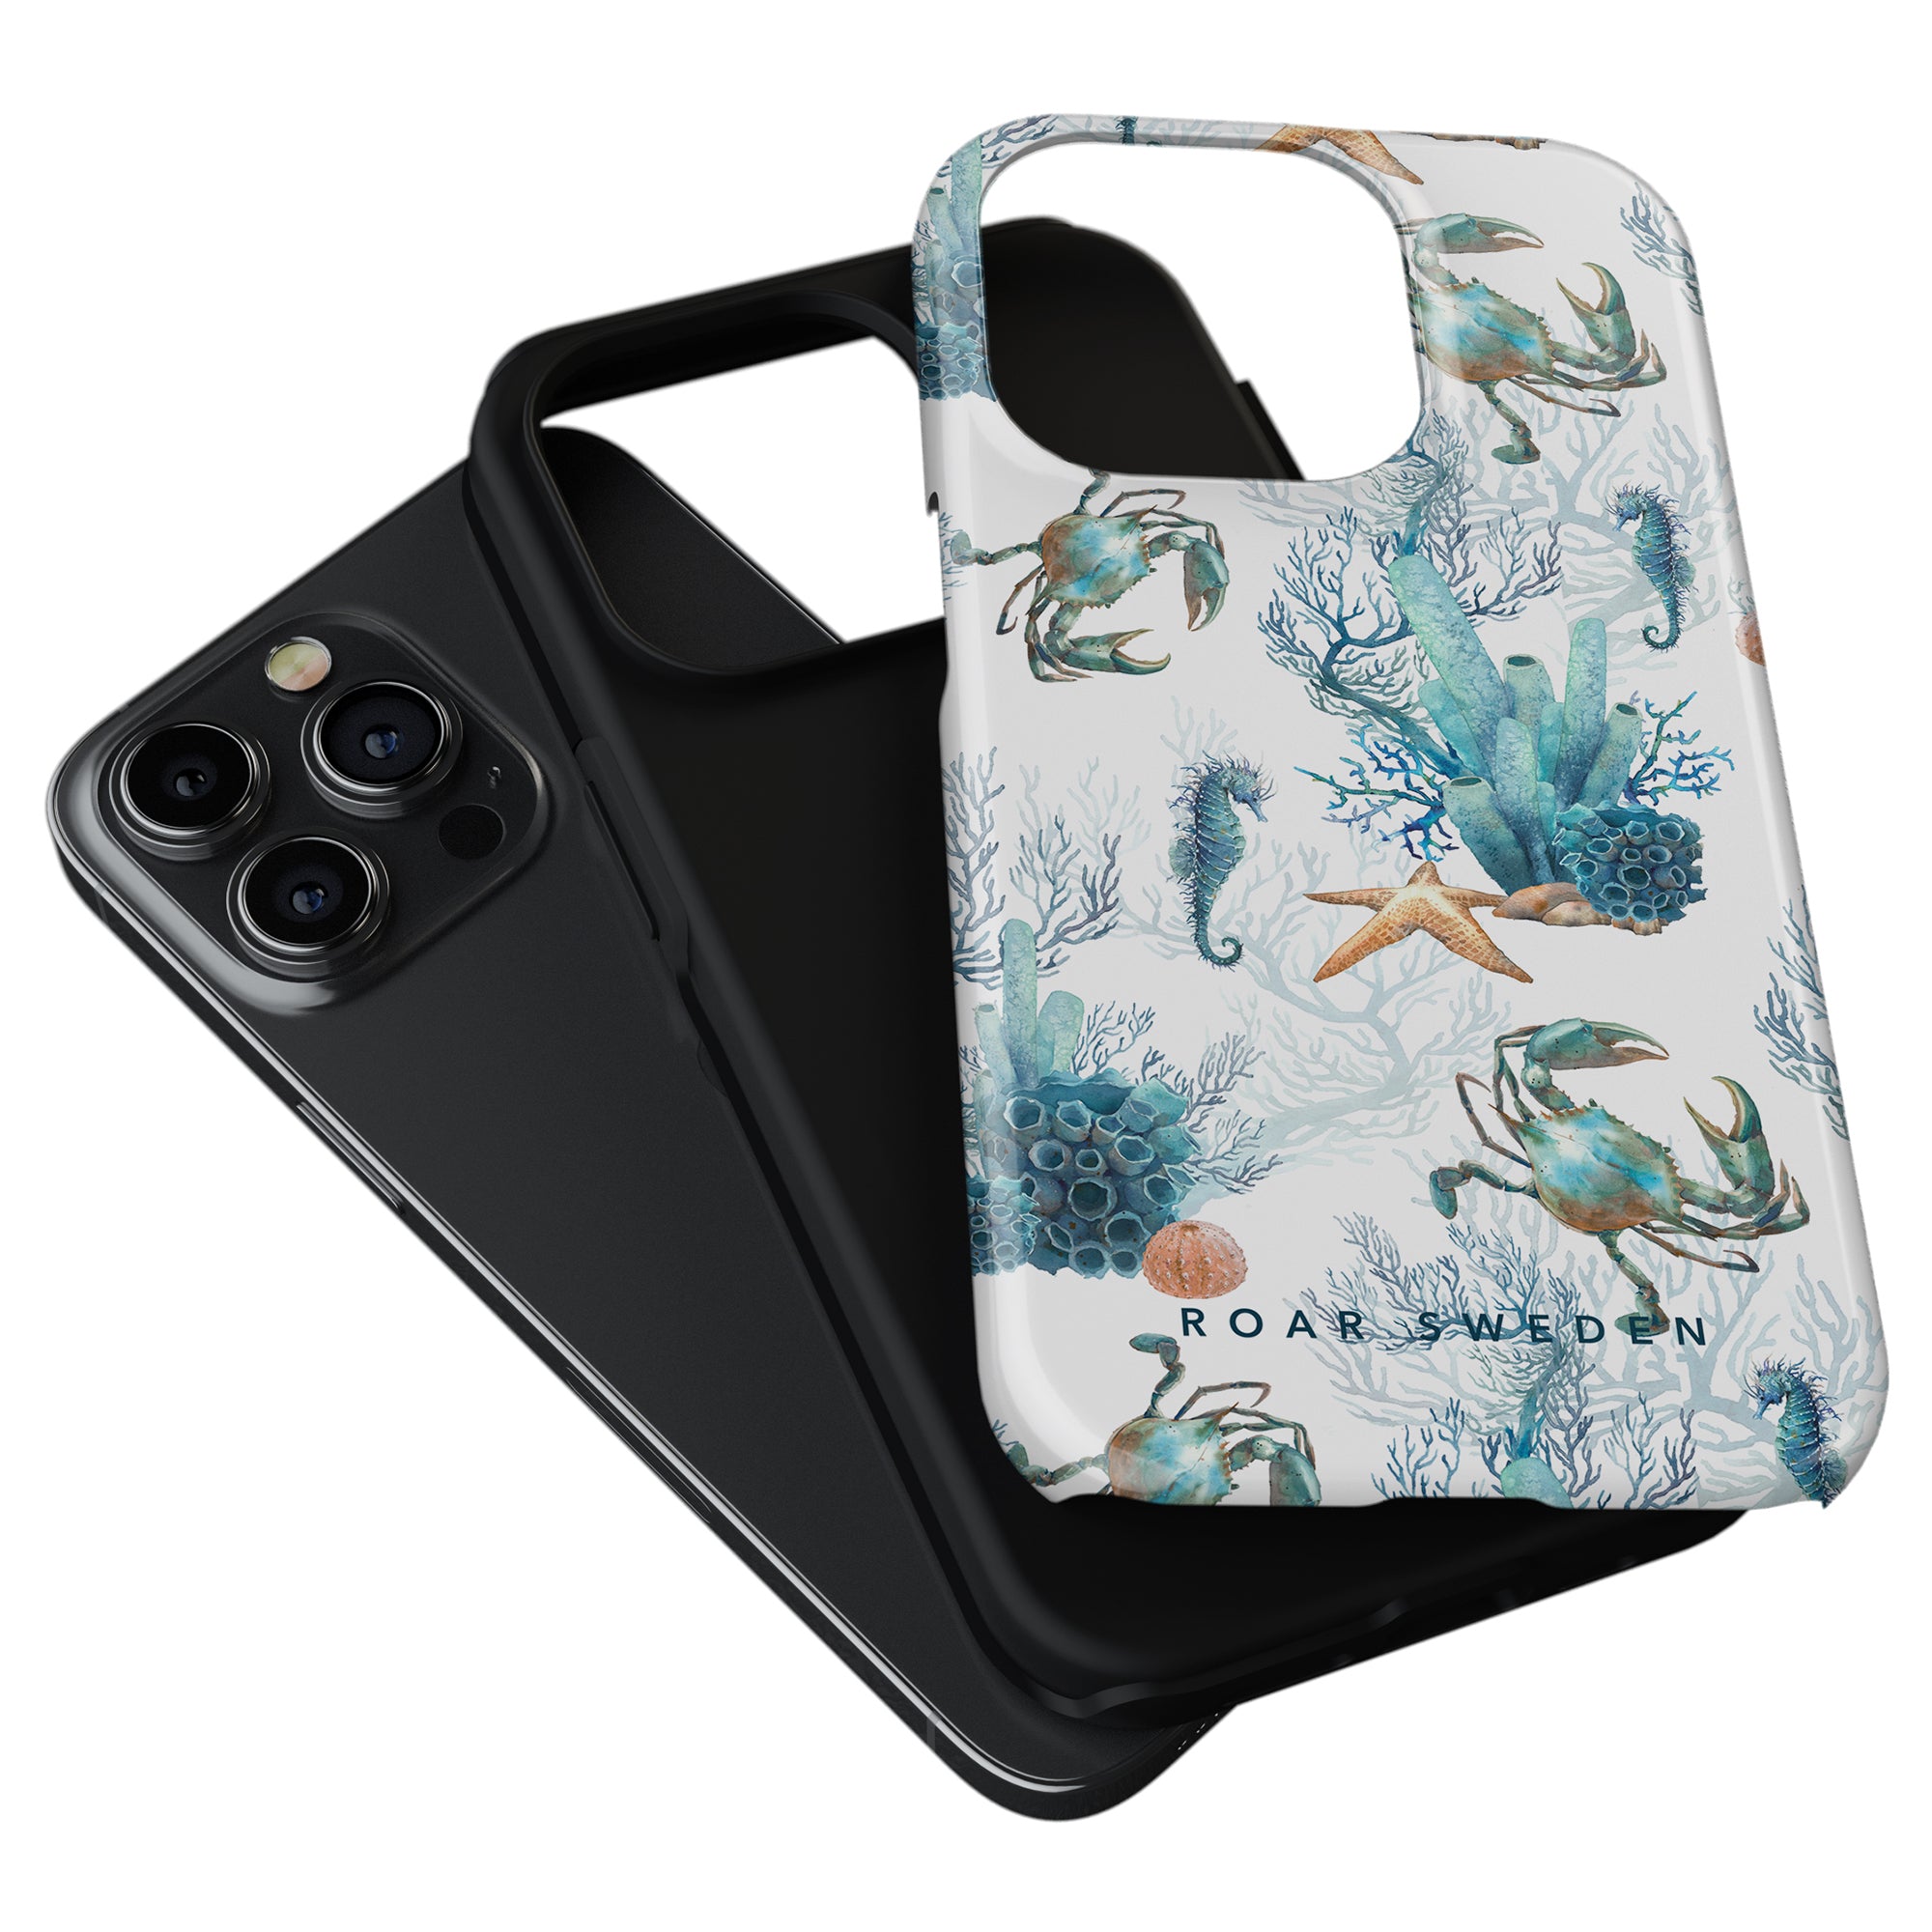 Black smartphone with a camera bump next to a Crab Reef - Tough Case with a marine life pattern.